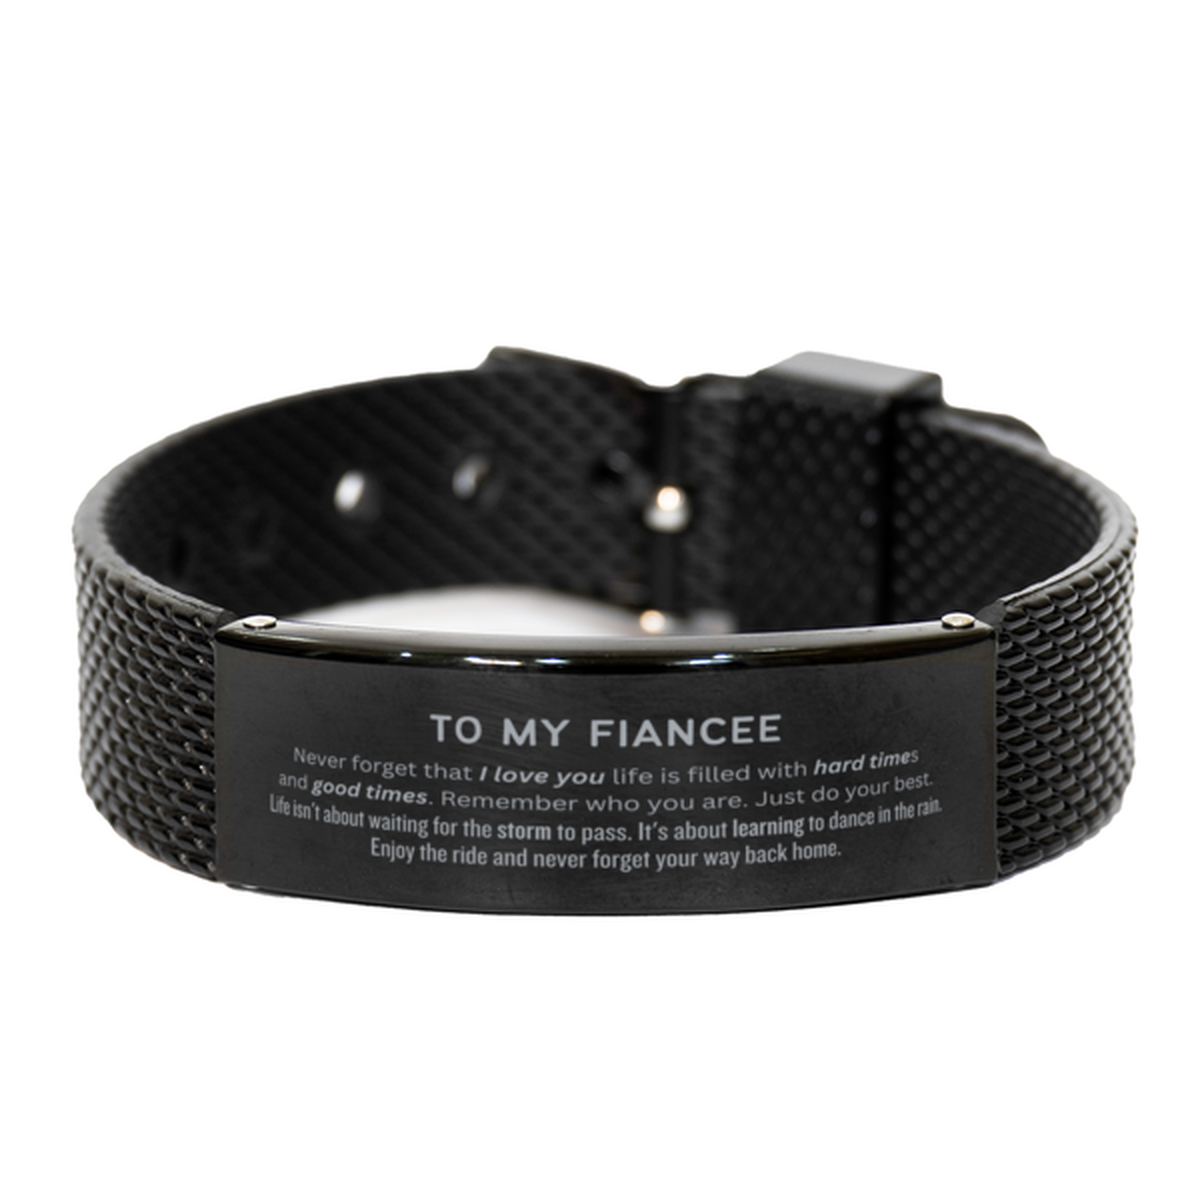 Christmas Fiancee Black Shark Mesh Bracelet Gifts, To My Fiancee Birthday Thank You Gifts For Fiancee, Graduation Unique Gifts For Fiancee To My Fiancee Never forget that I love you life is filled with hard times and good times. Remember who you are. Just